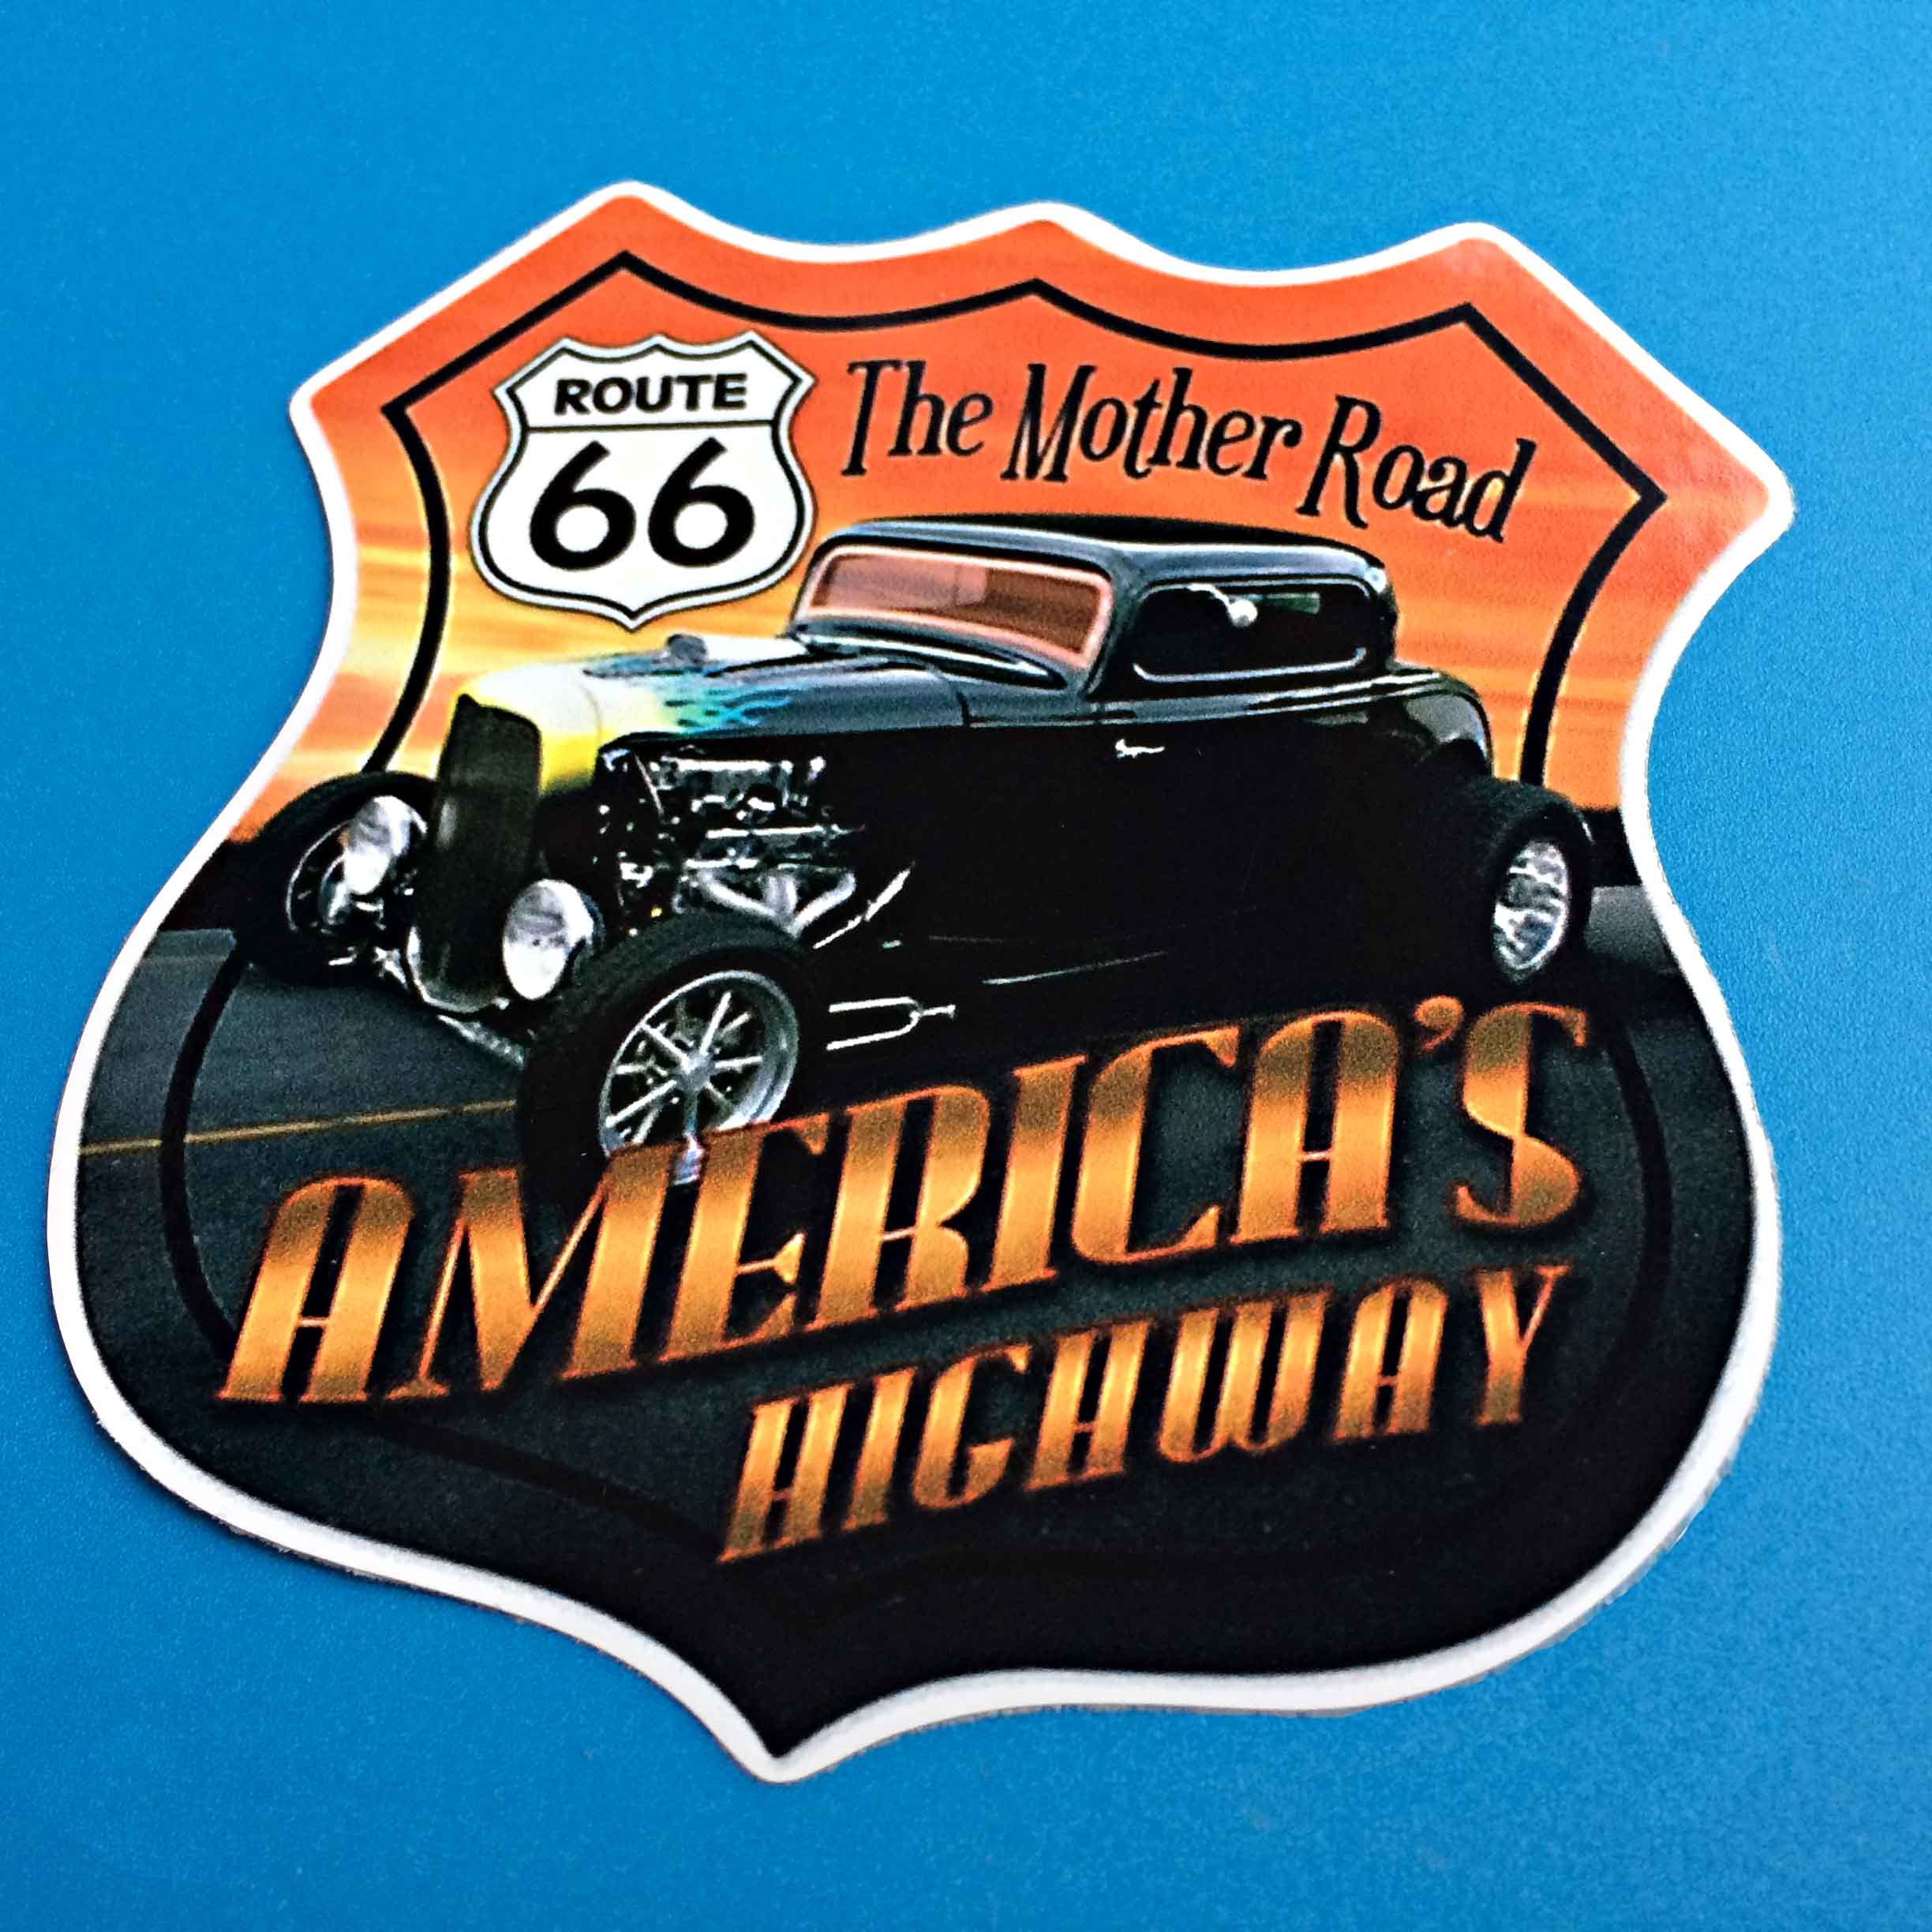 Route 66 sign, The Mother Road America's Highway lettering in gold. An American black classic car on the highway at sunset . A Route 66 sign shaped sticker.